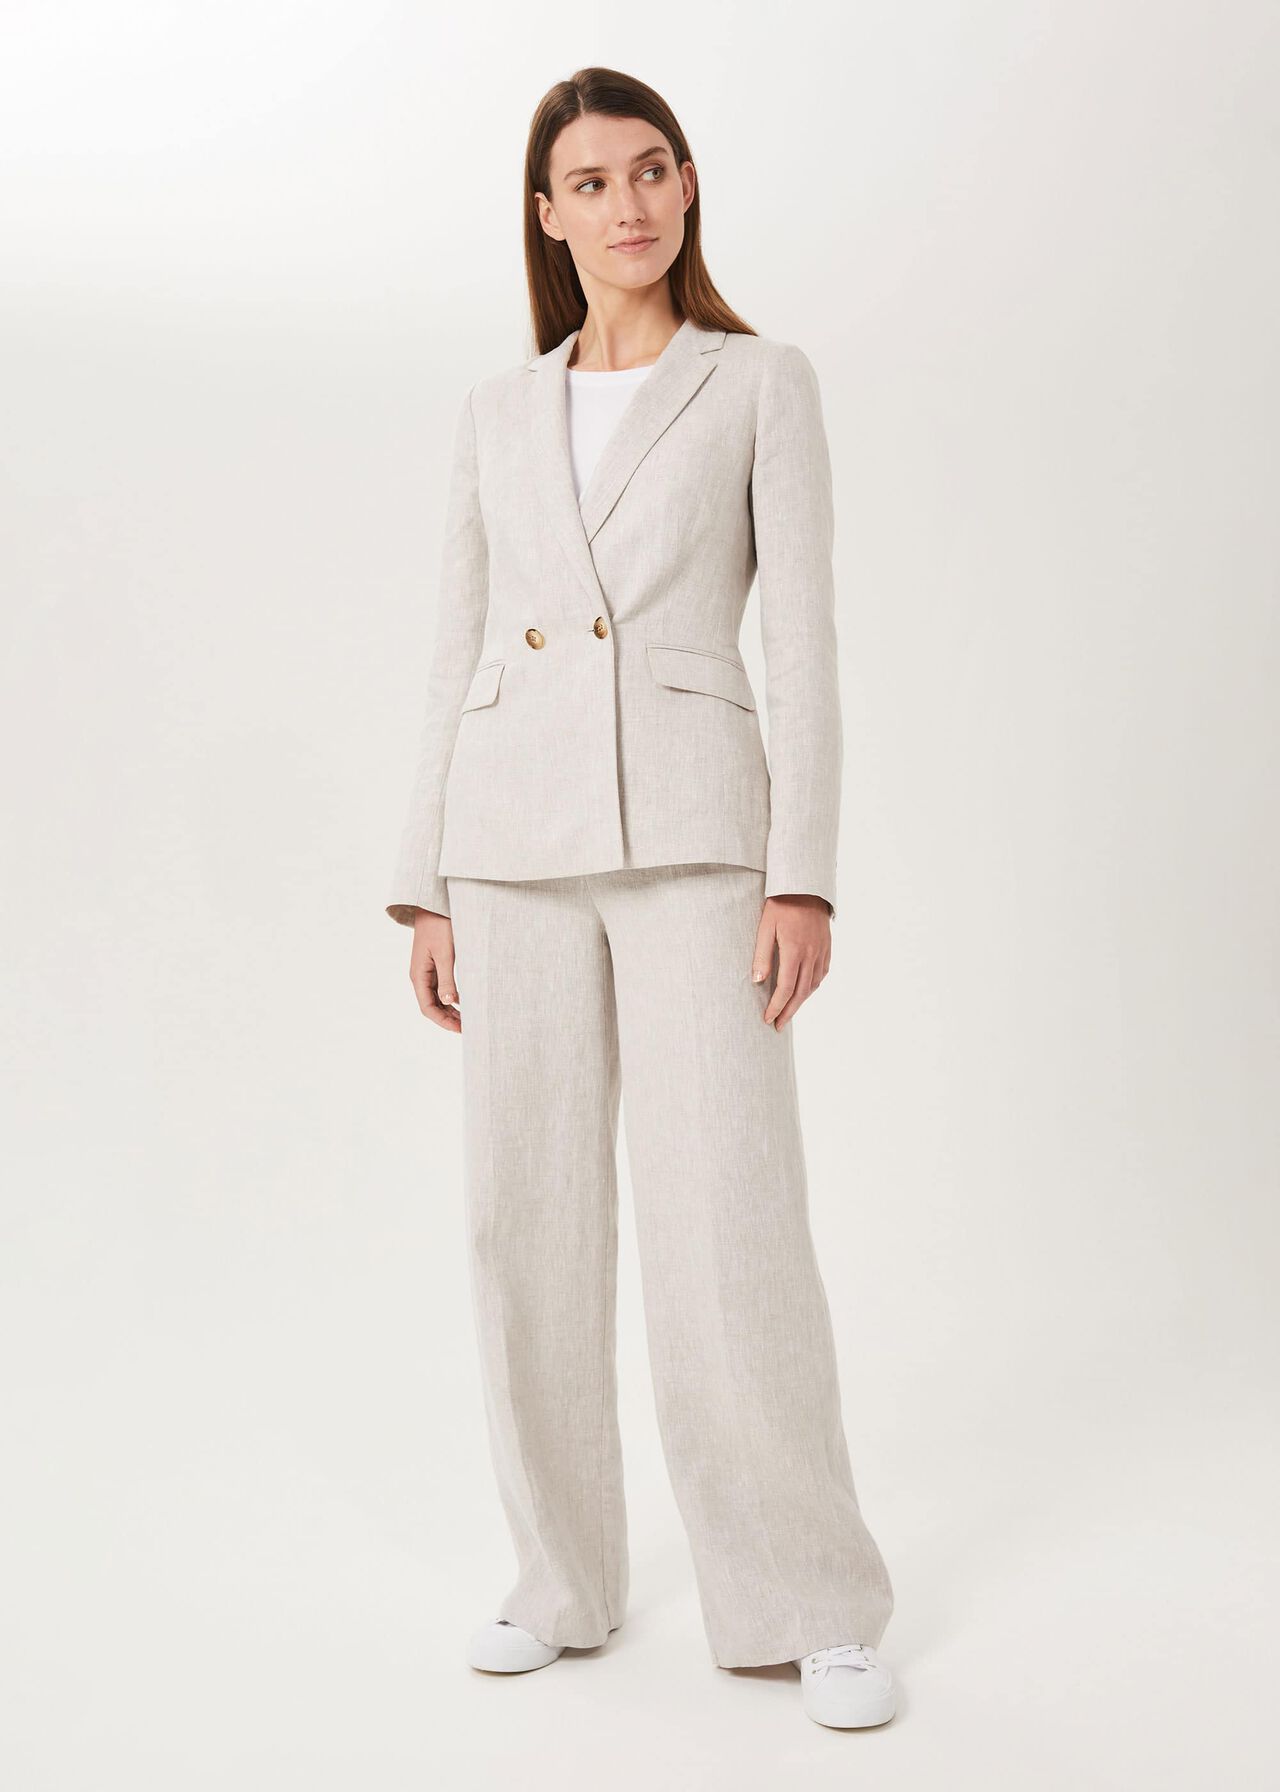 Maeve Linen Trousers With Stretch, Neutral, hi-res